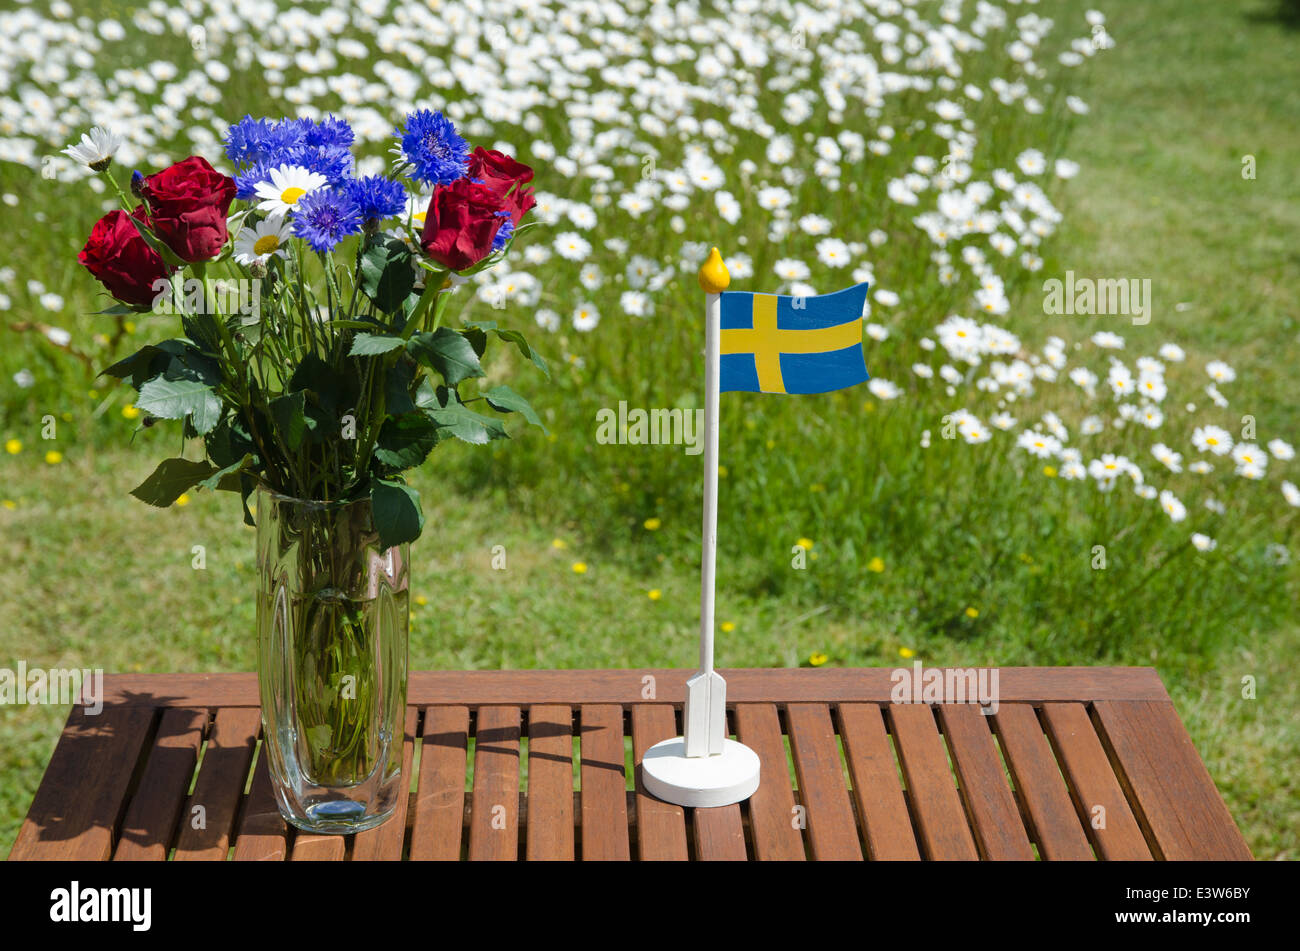 Table with summer flowers and a swedish flag in a garden with daisies Stock Photo